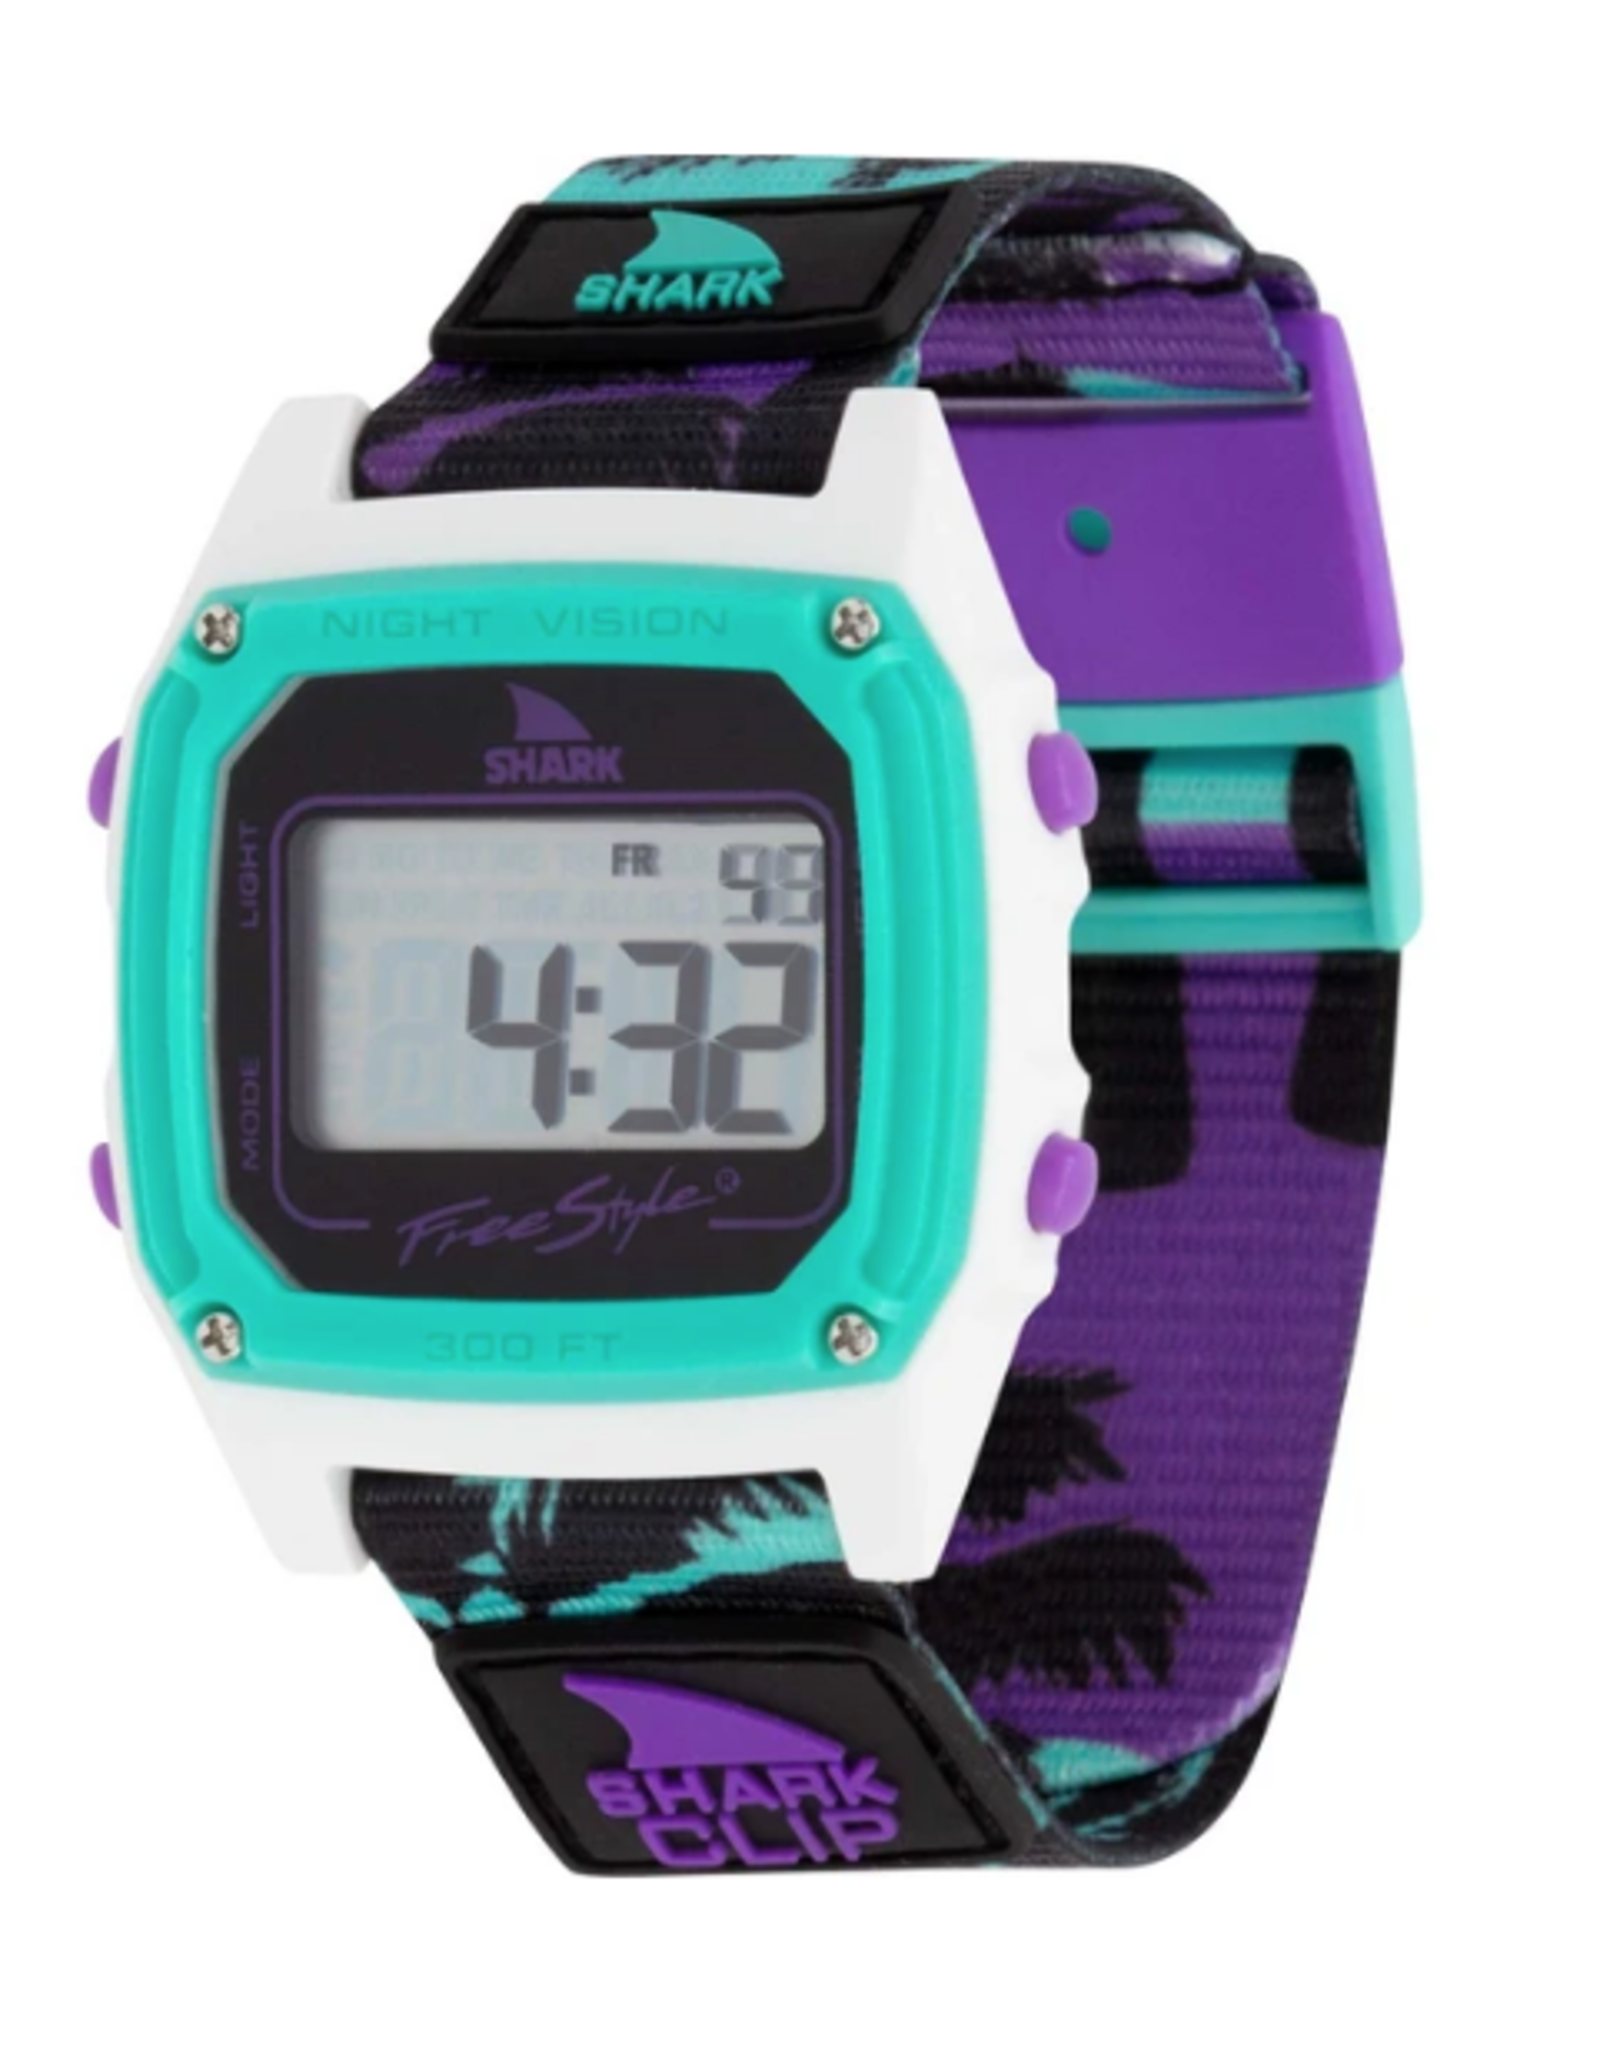 FREESTYLE FREESTYLE SHARK CLASSIC CLIP AMBER TORREALBA SIGNATURE WATCH